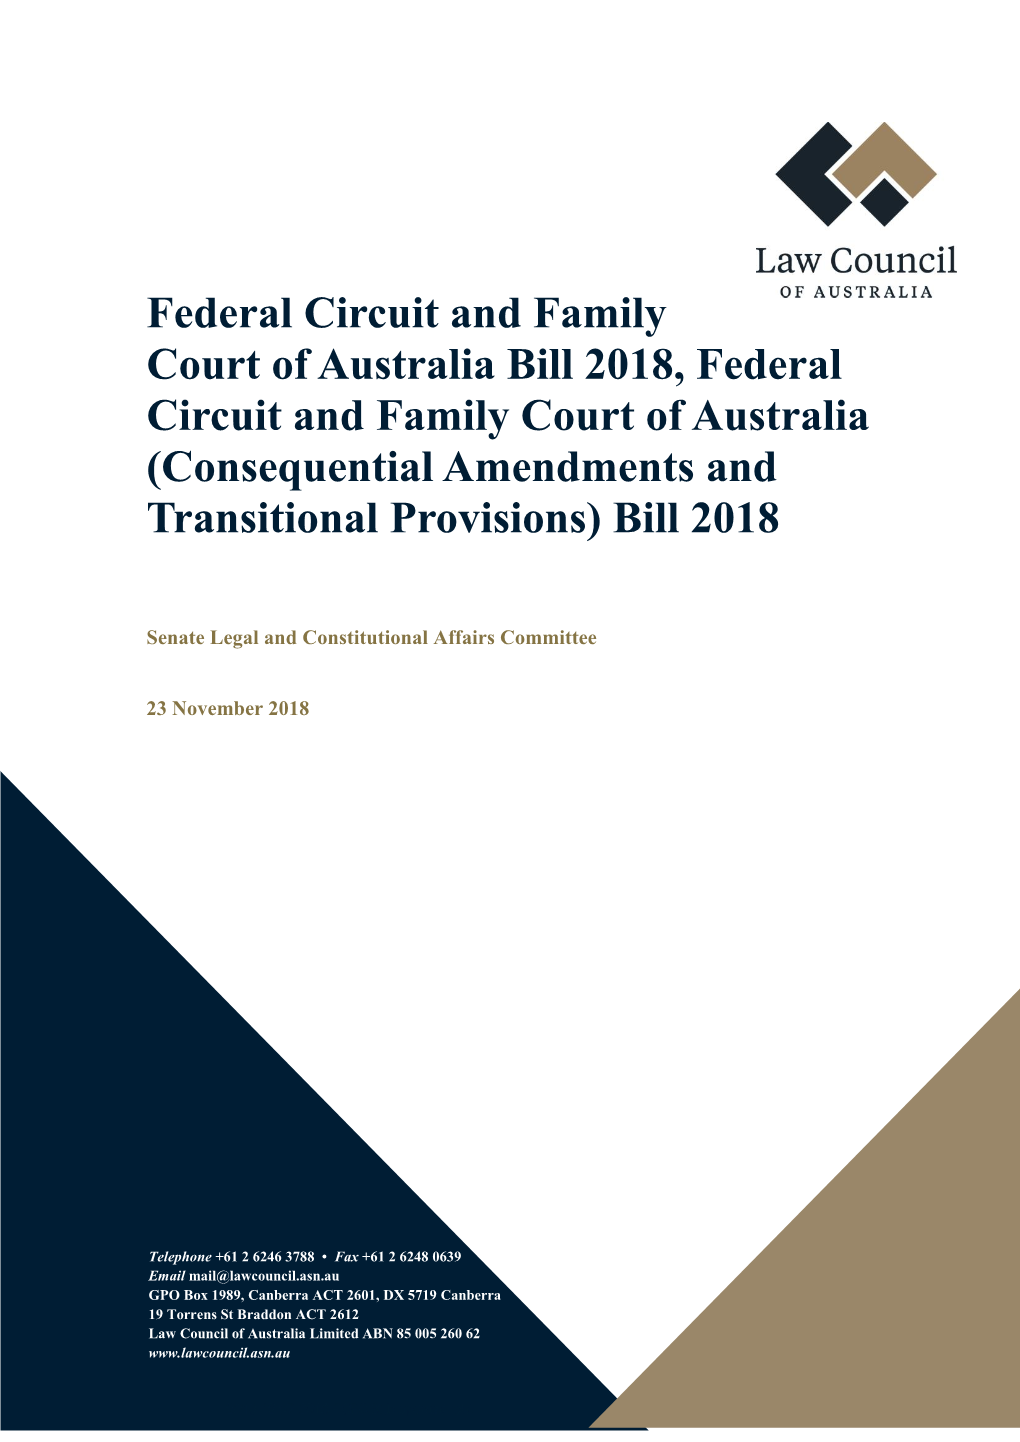 Federal Circuit and Family Court of Australia Bill 2018, Federal Circuit